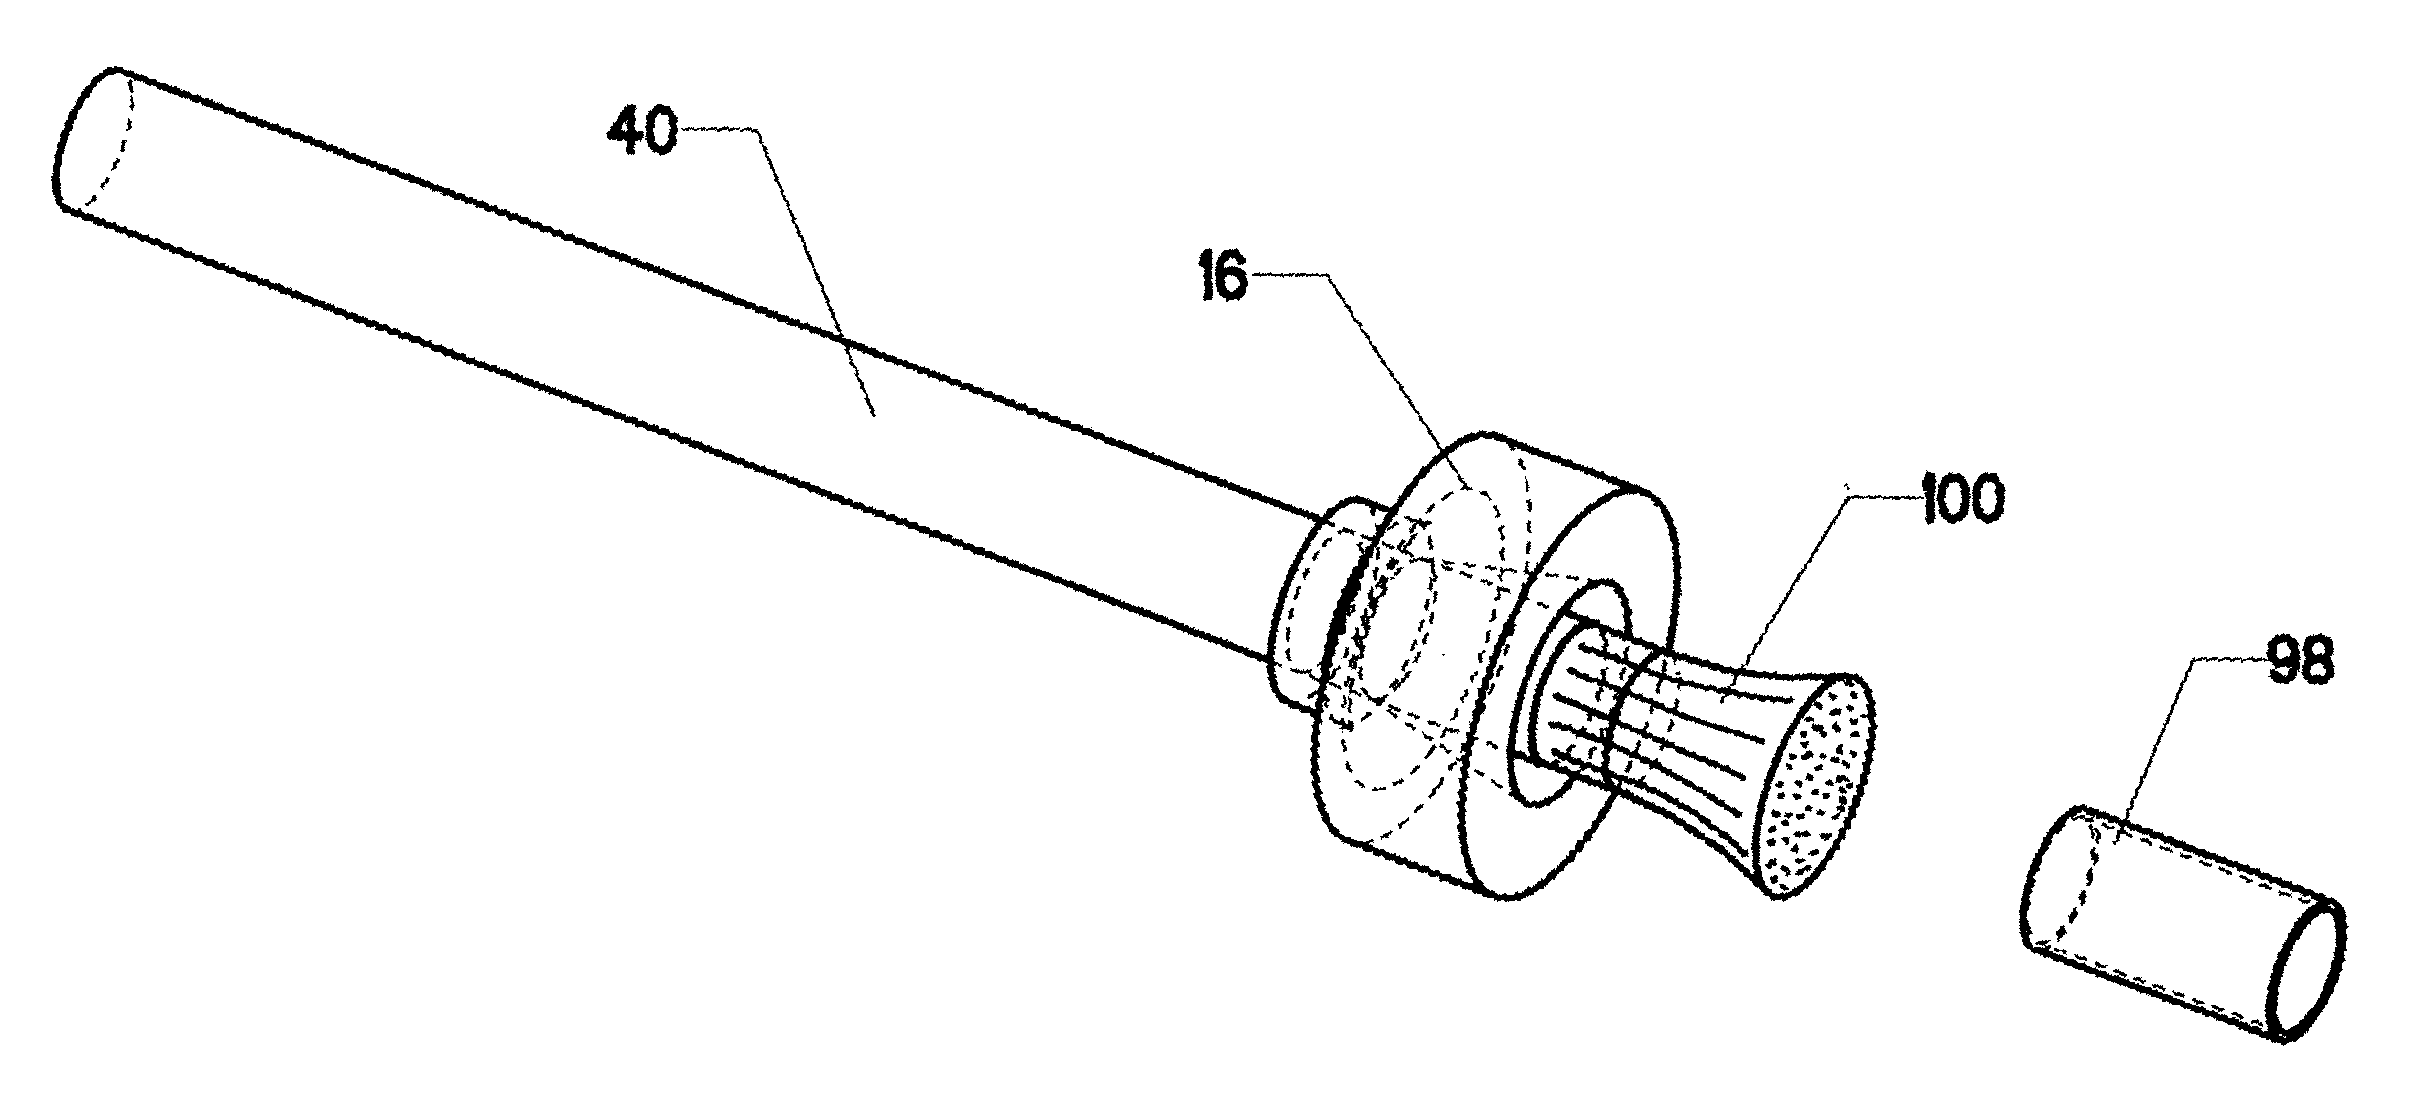 Cable manufacturing method